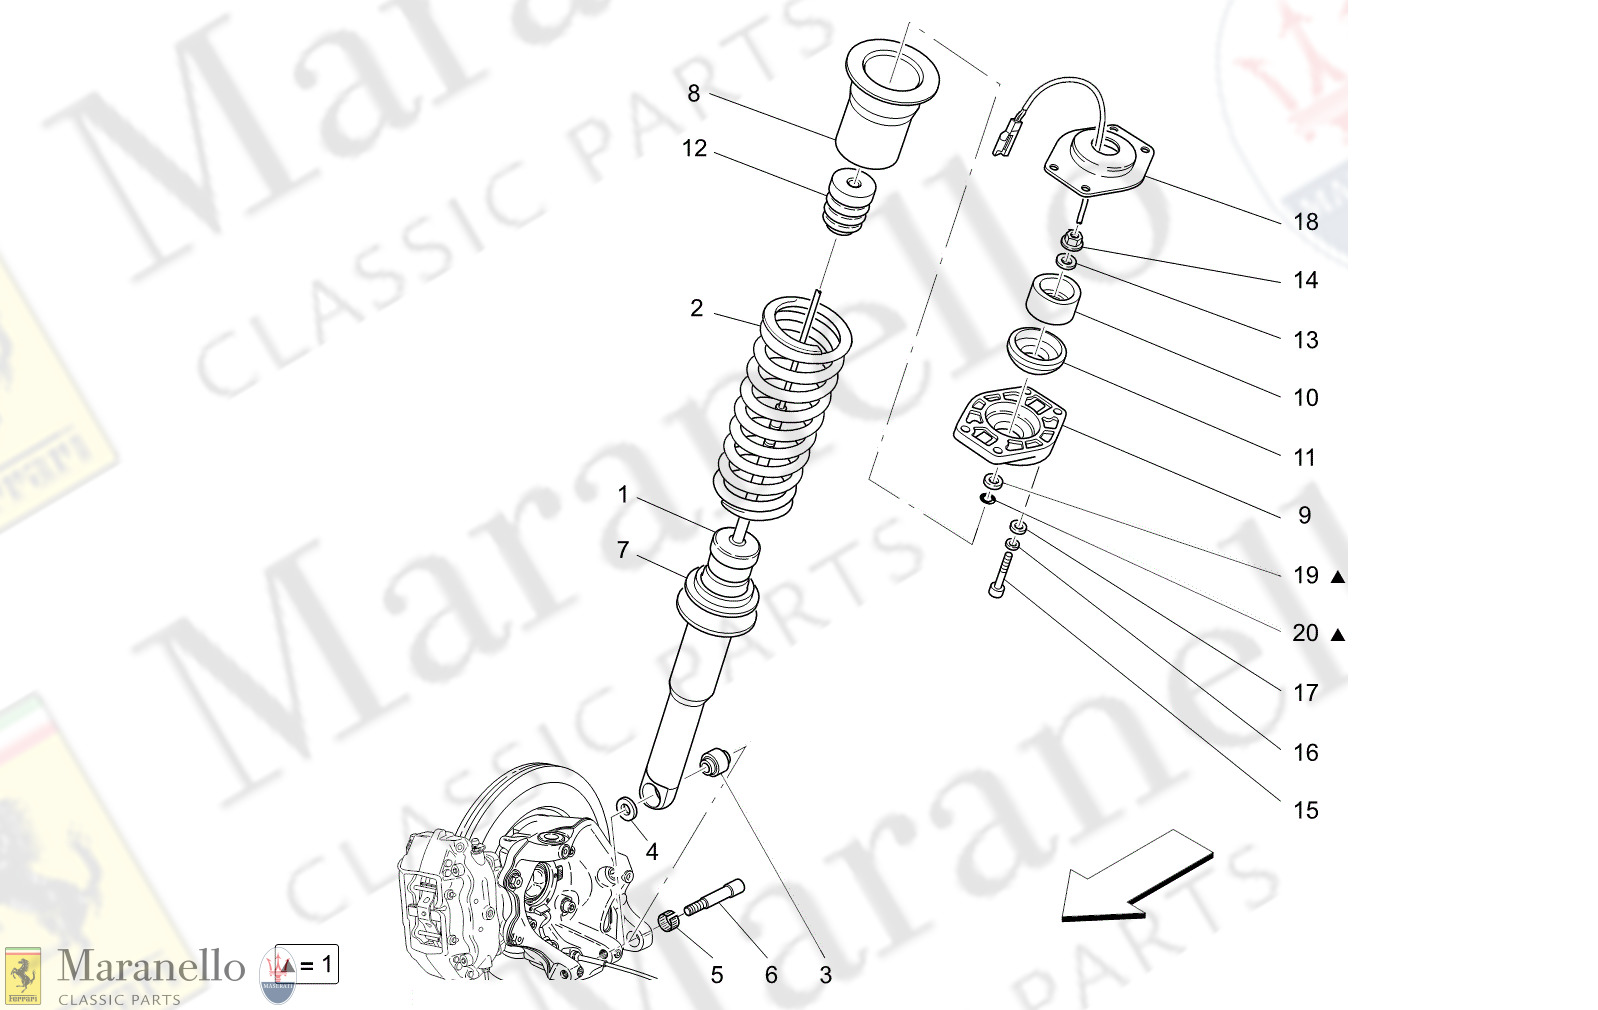 06.21 - 17 - 0621 - 17 Rear Shock Absorber Devices